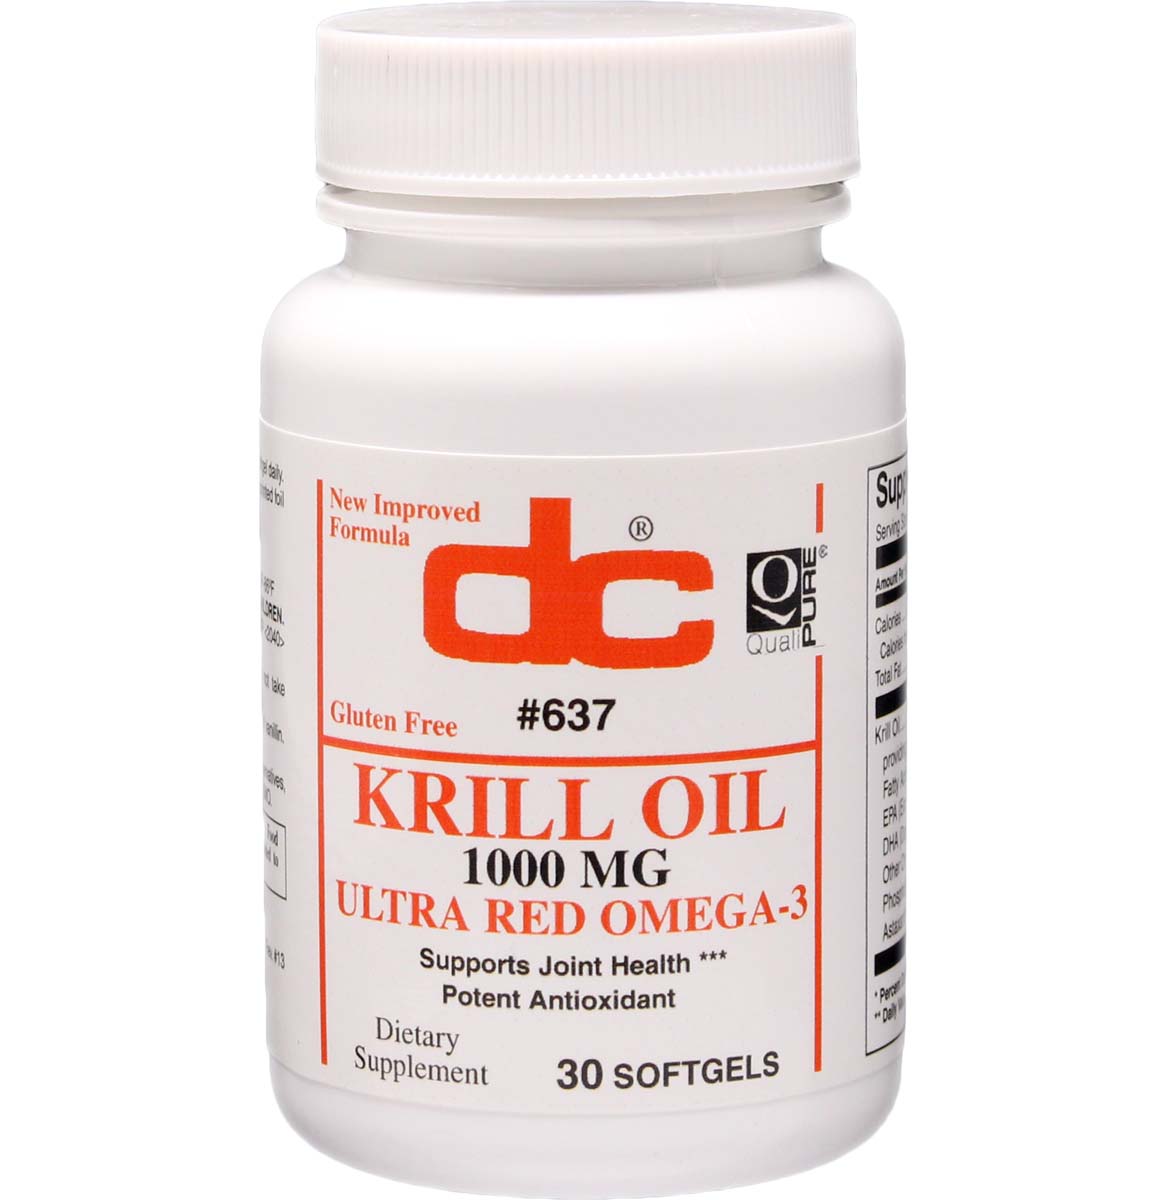 KRILL OIL 1000 MG PhosphOmega with Omega-3 and Astaxanthin